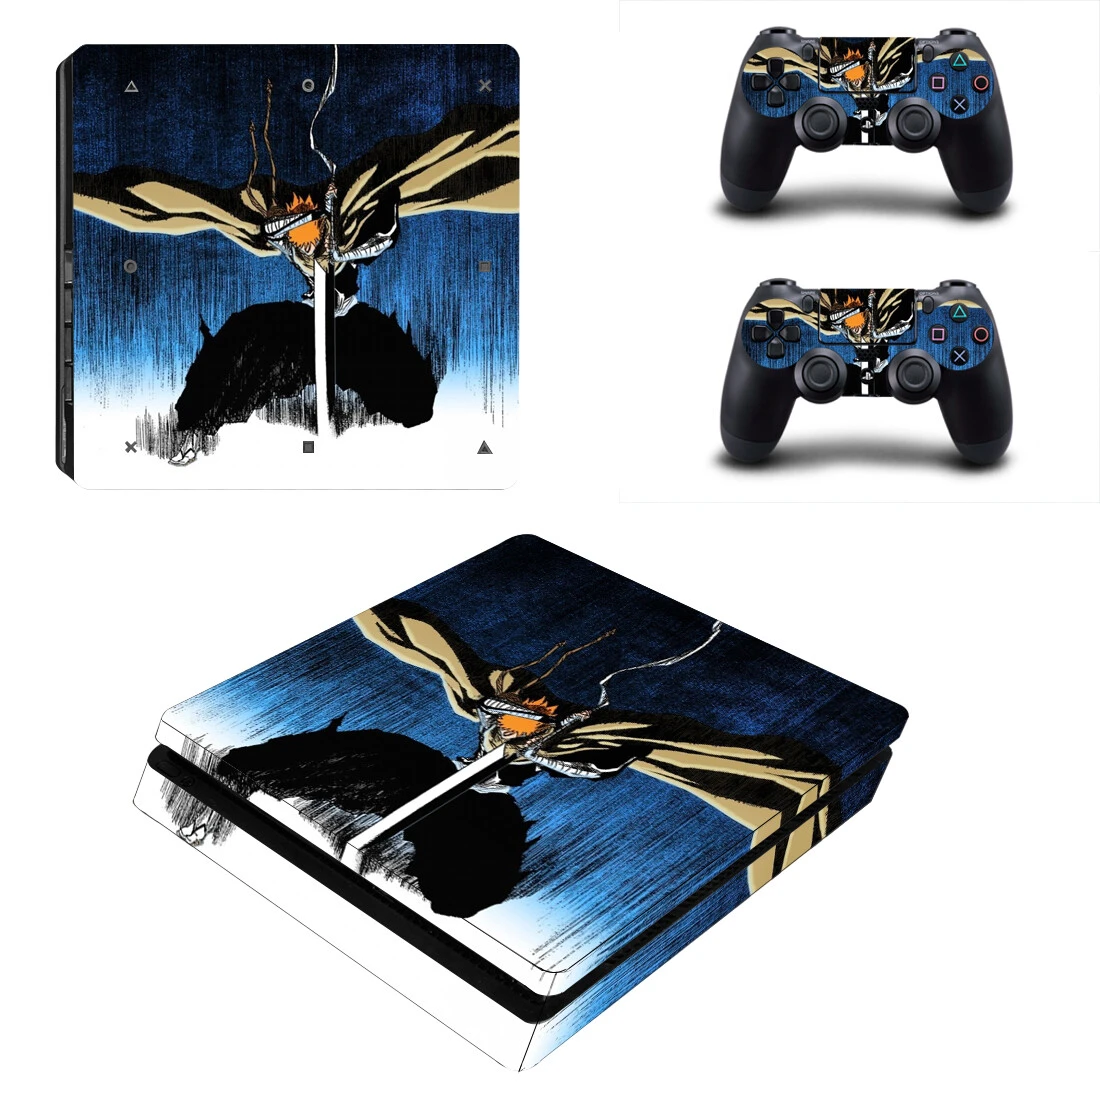 Skins Anime Slim Console Ps4 Controller | Sony Playstation 4 Skin Sticker  Anime - Ps4 - Aliexpress